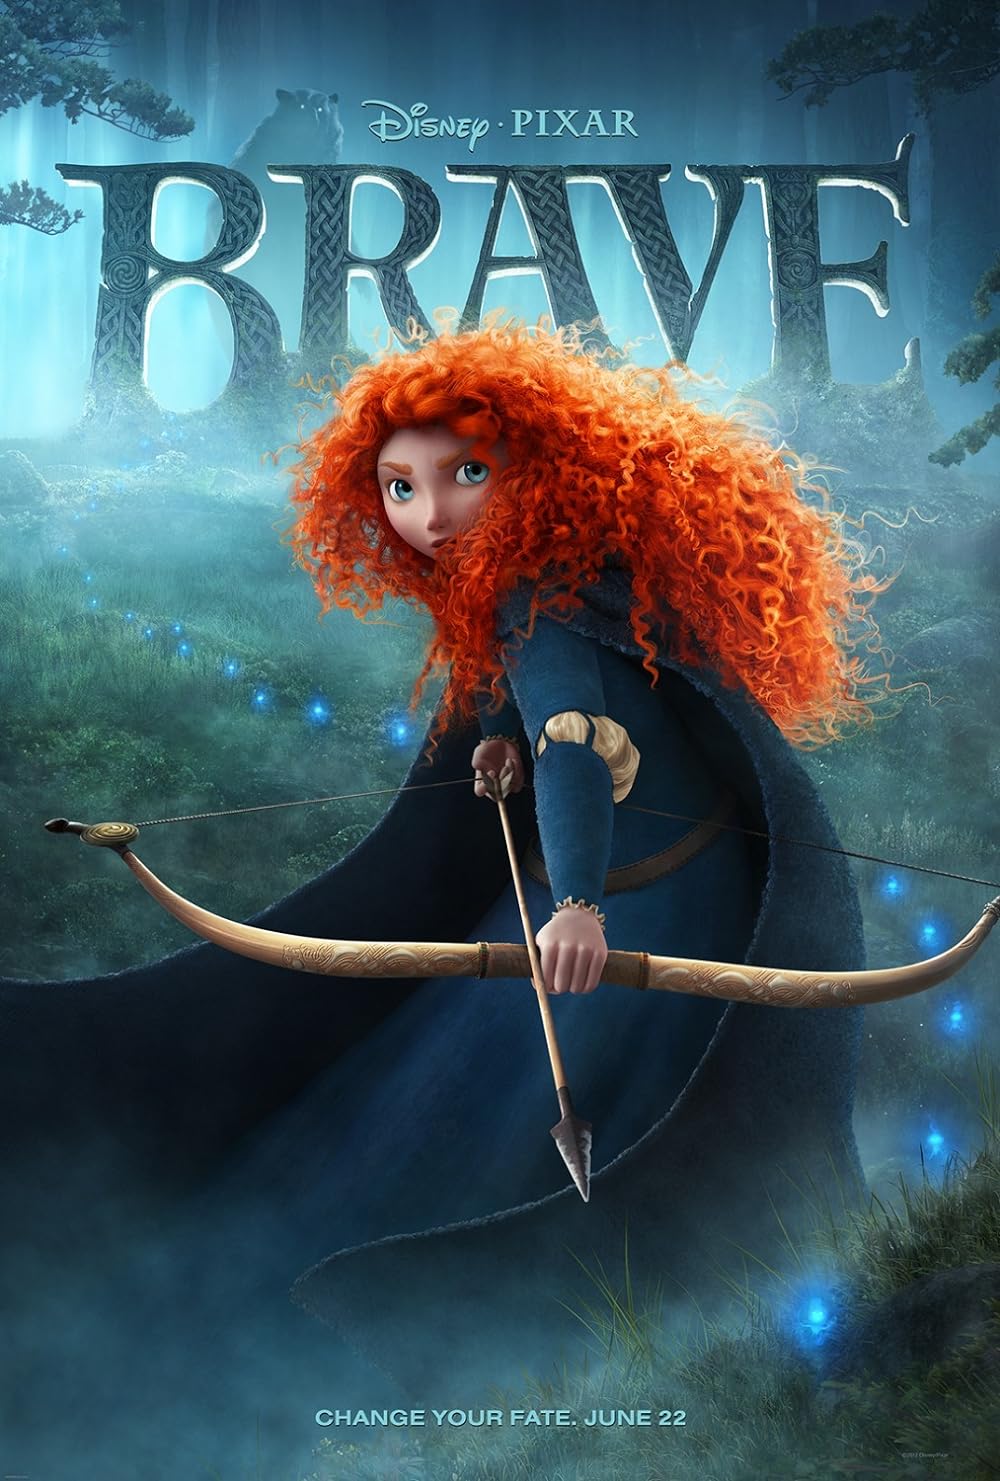 beth pate recommends brave full movie free pic